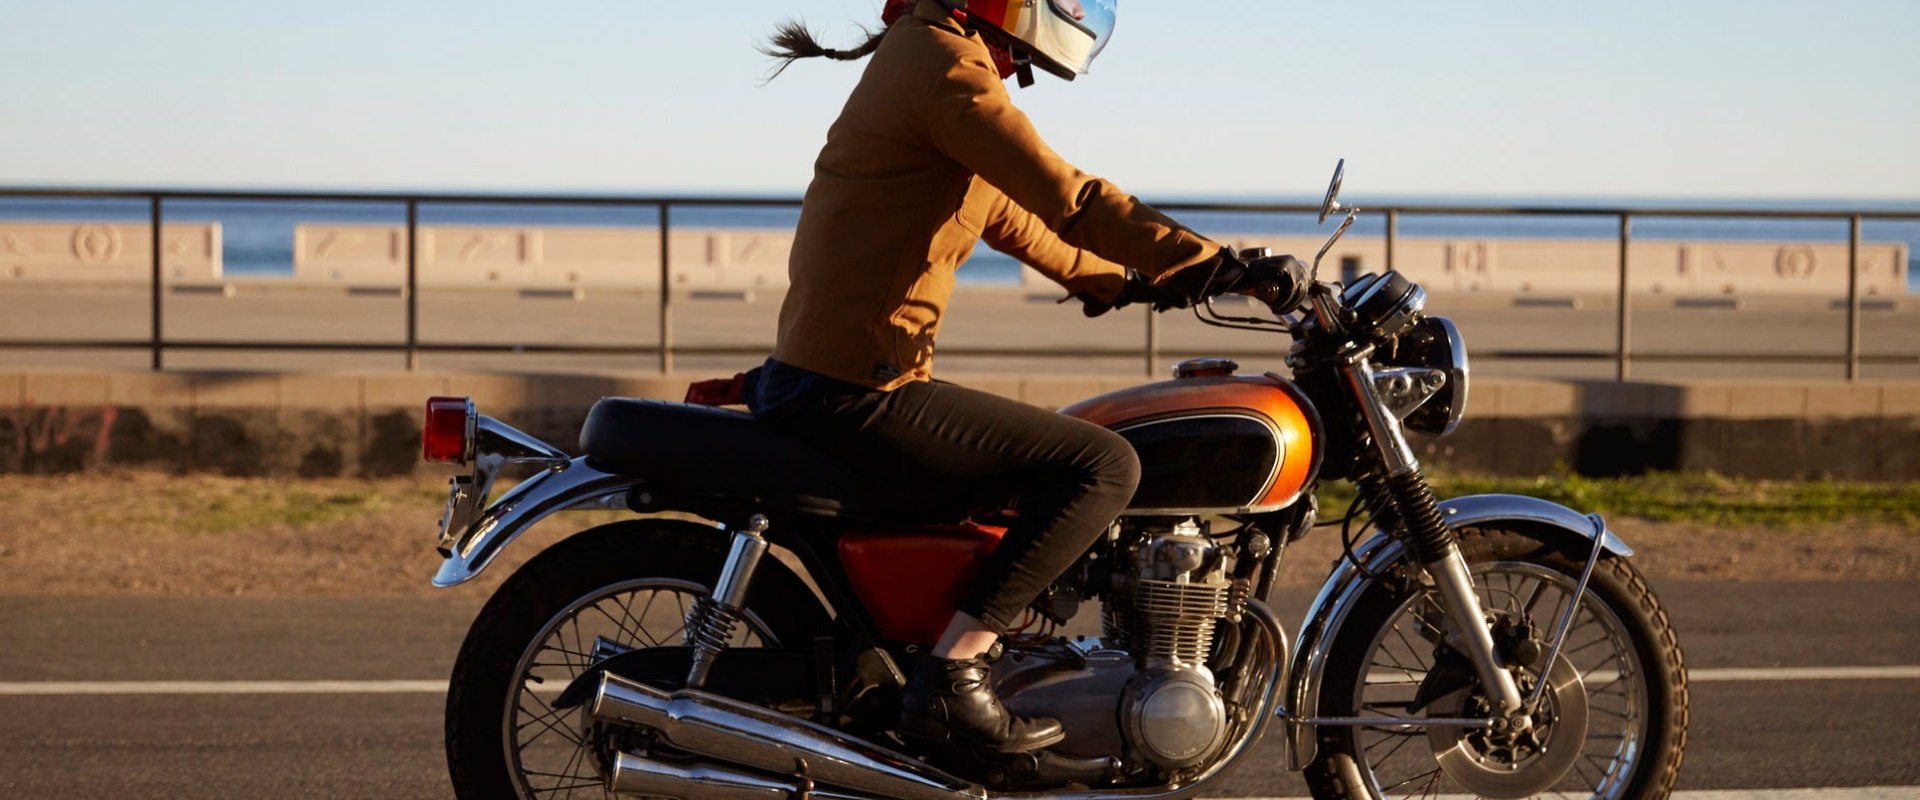 How to Save on Motorcycle Insurance for College Students